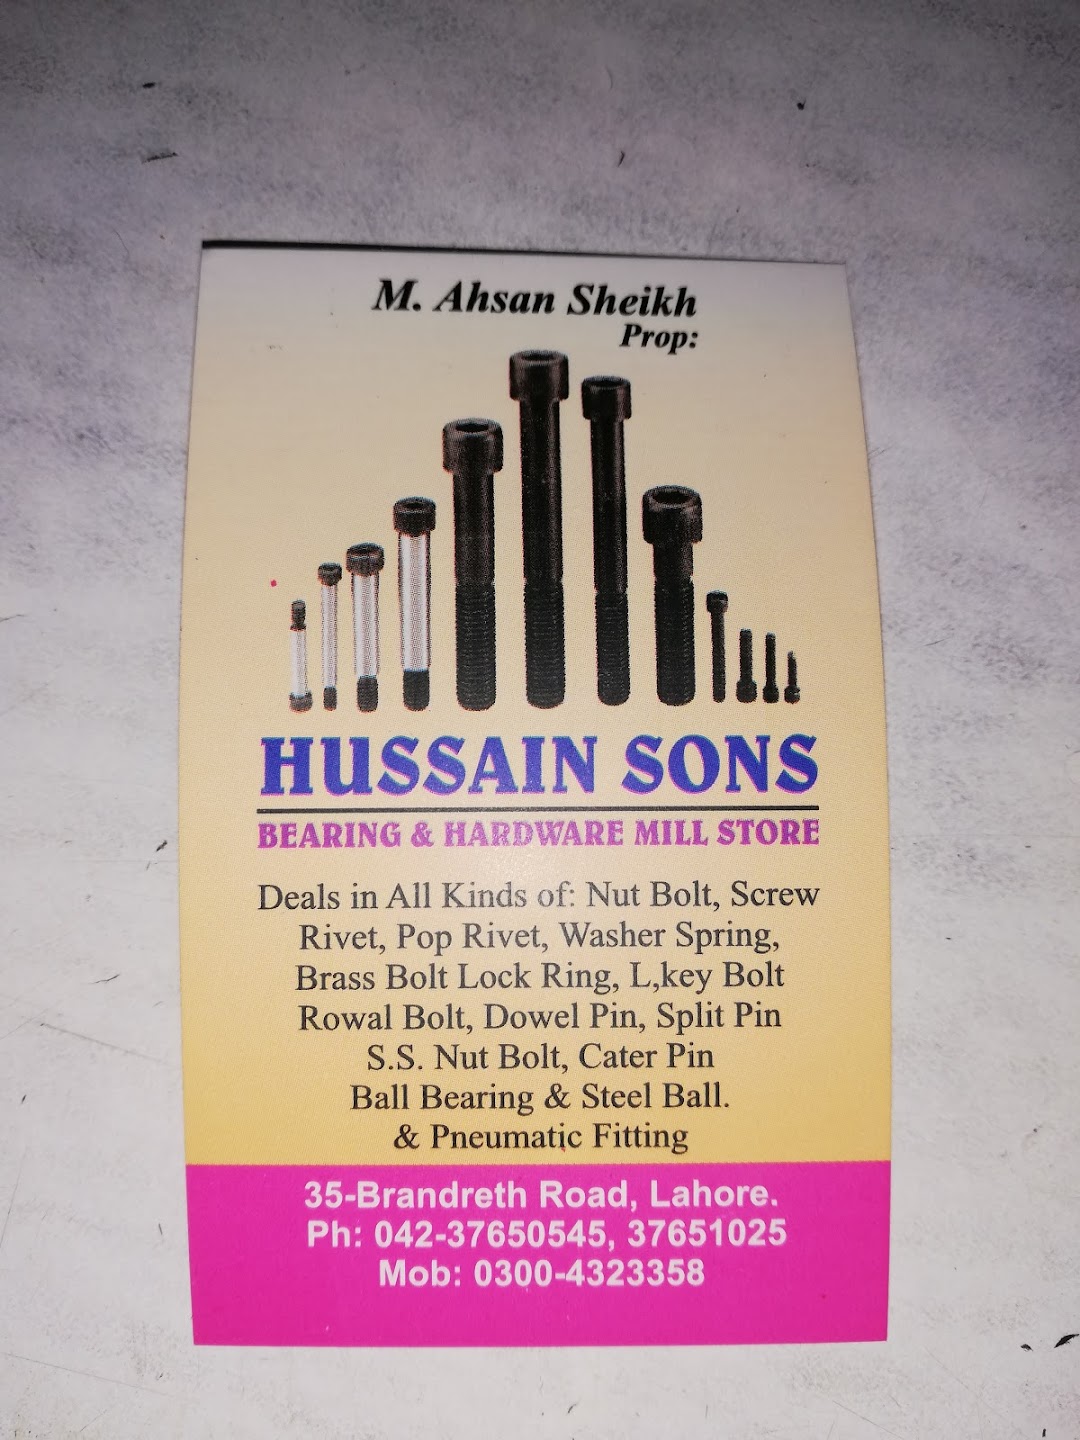 Hussain Sons Hardware & Mill Store